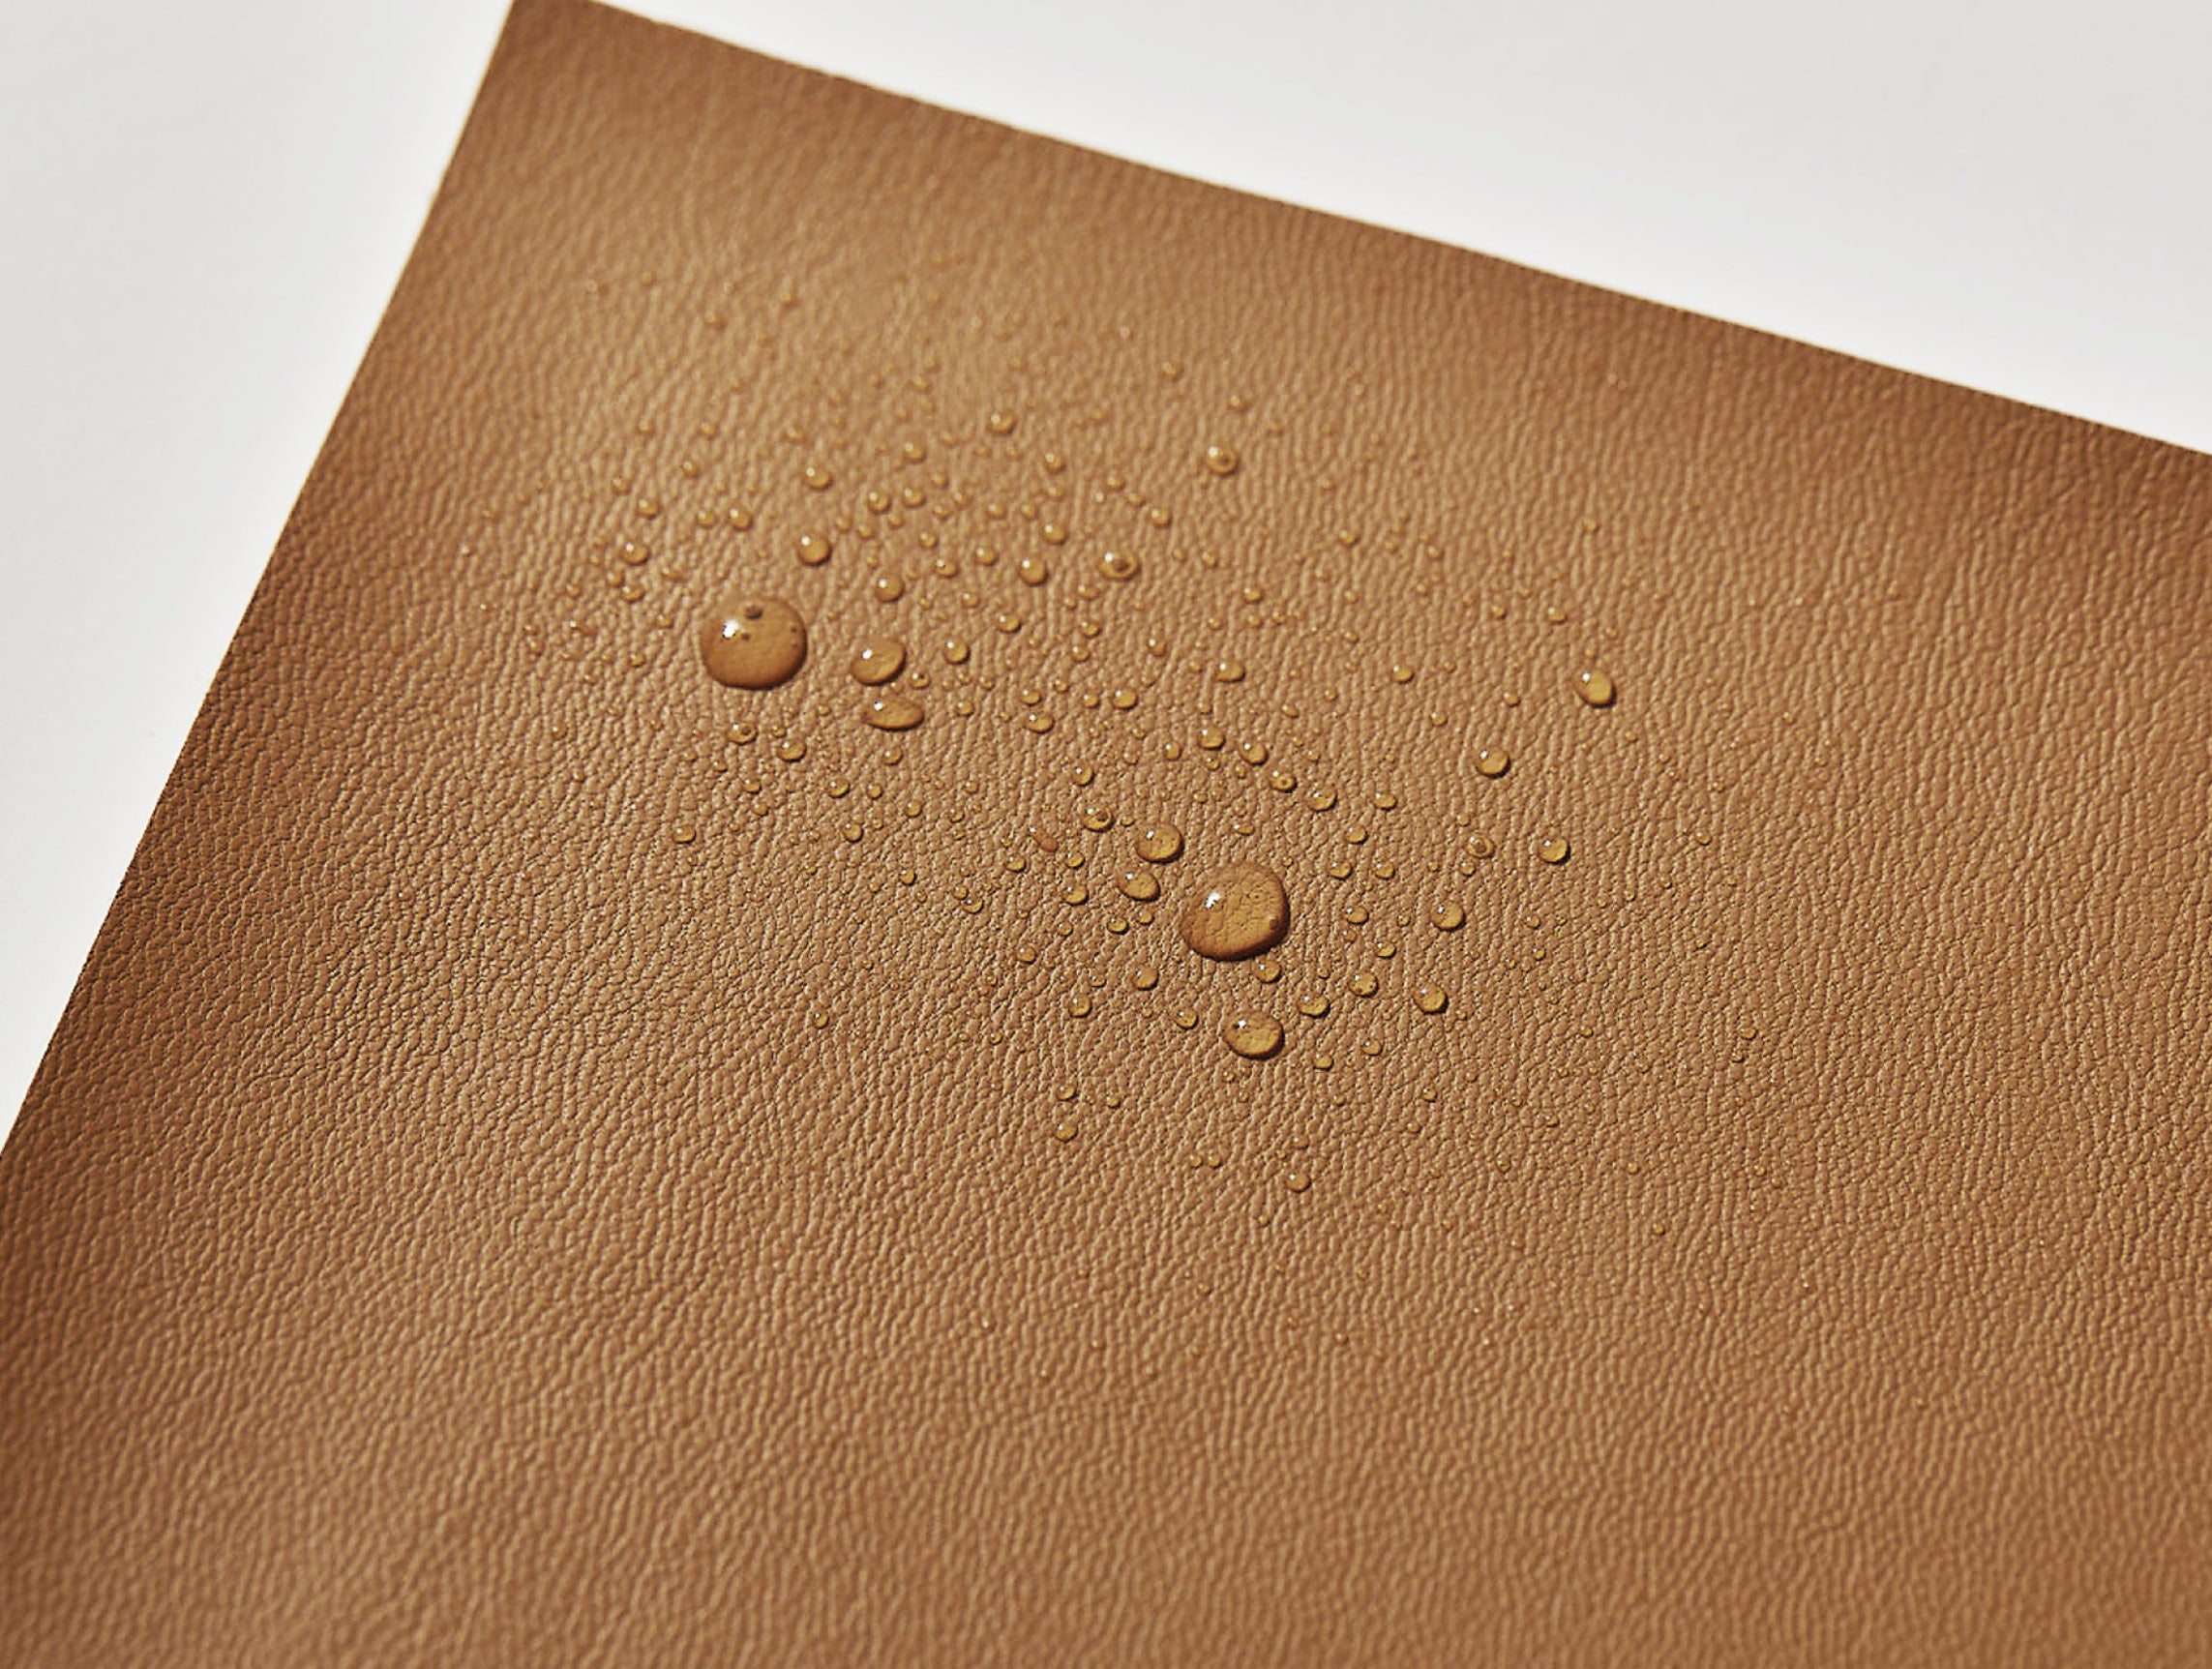 Banbū Leather in Banbū Leather in Caramel image 3